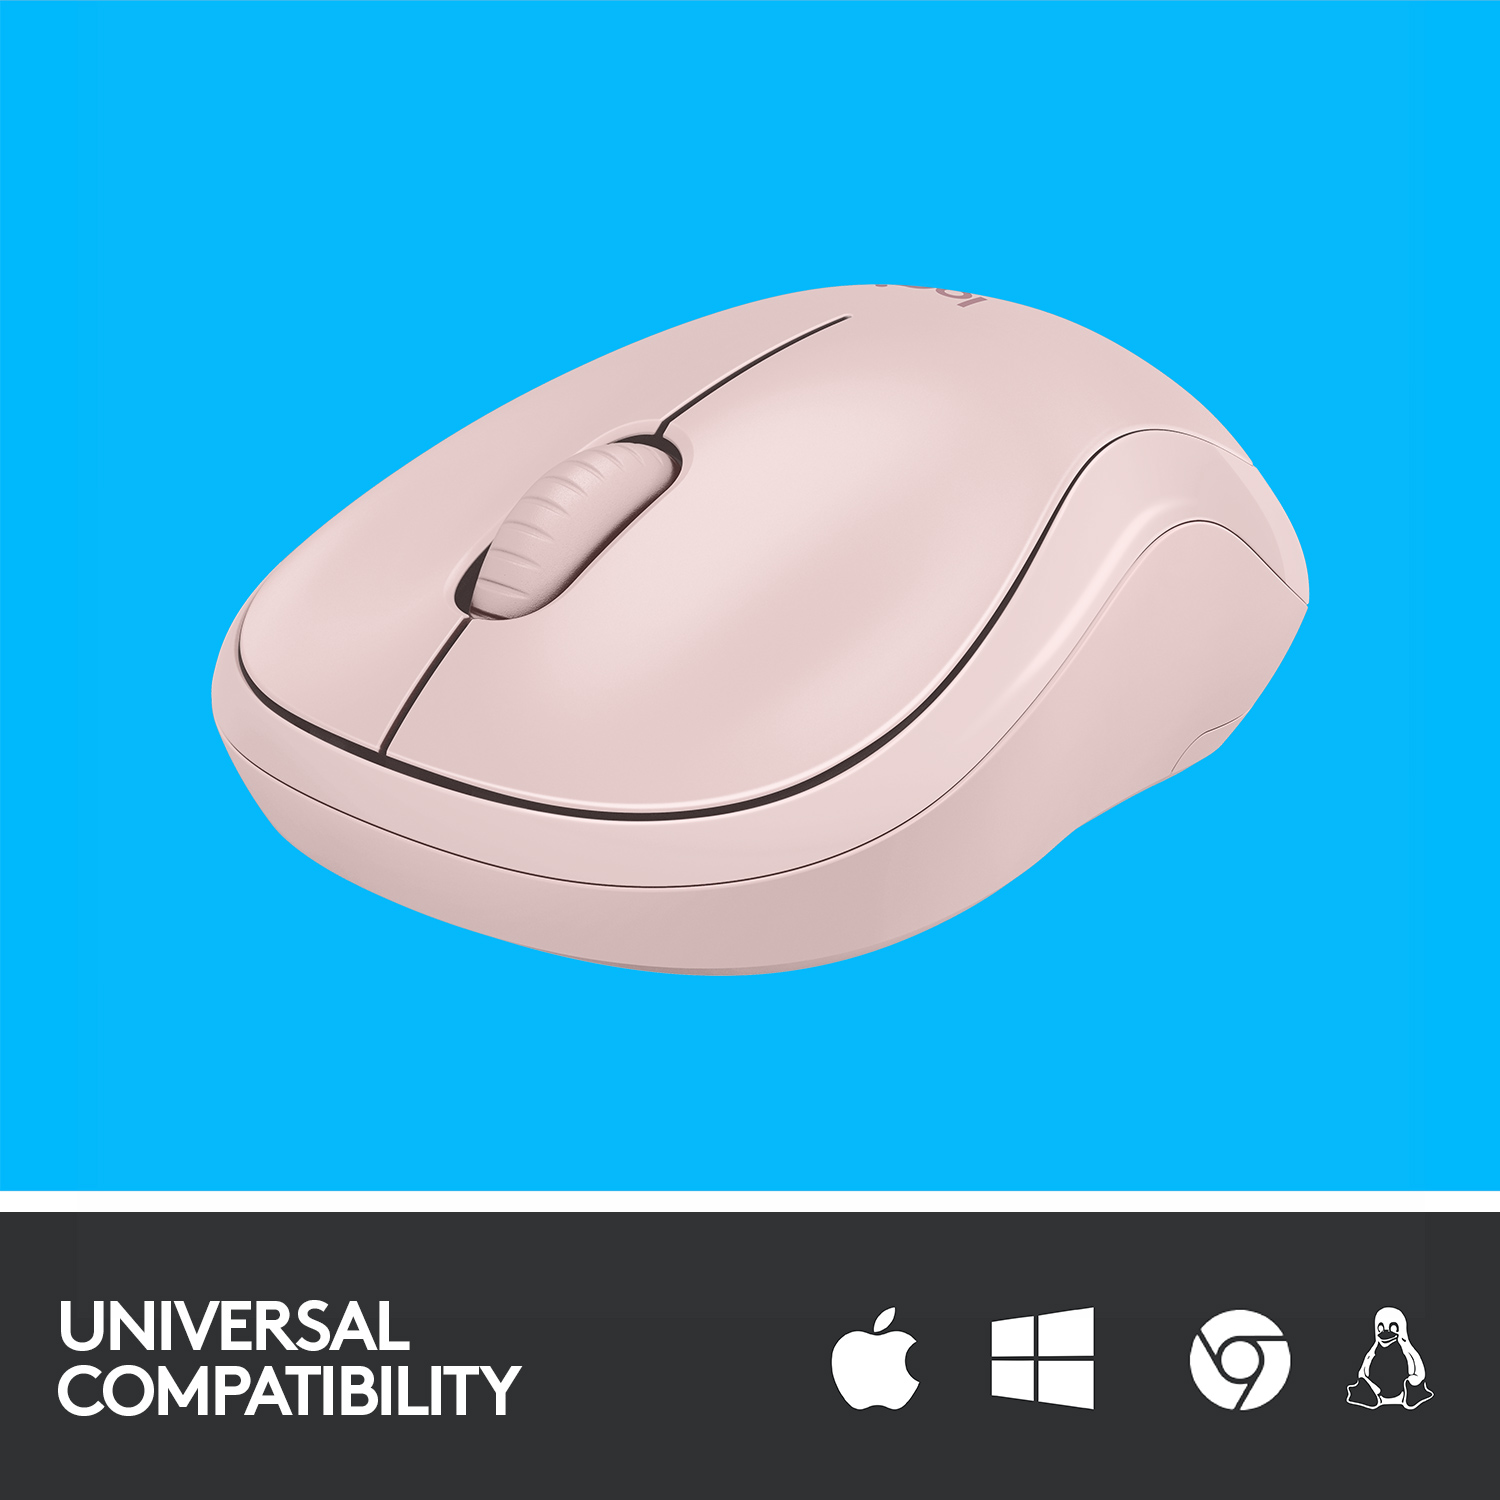 Logitech Silent WRLS Mouse, 2.4 GHz with USB Receiver, Optical Tracking, Ambidextrous, Rose - image 4 of 8